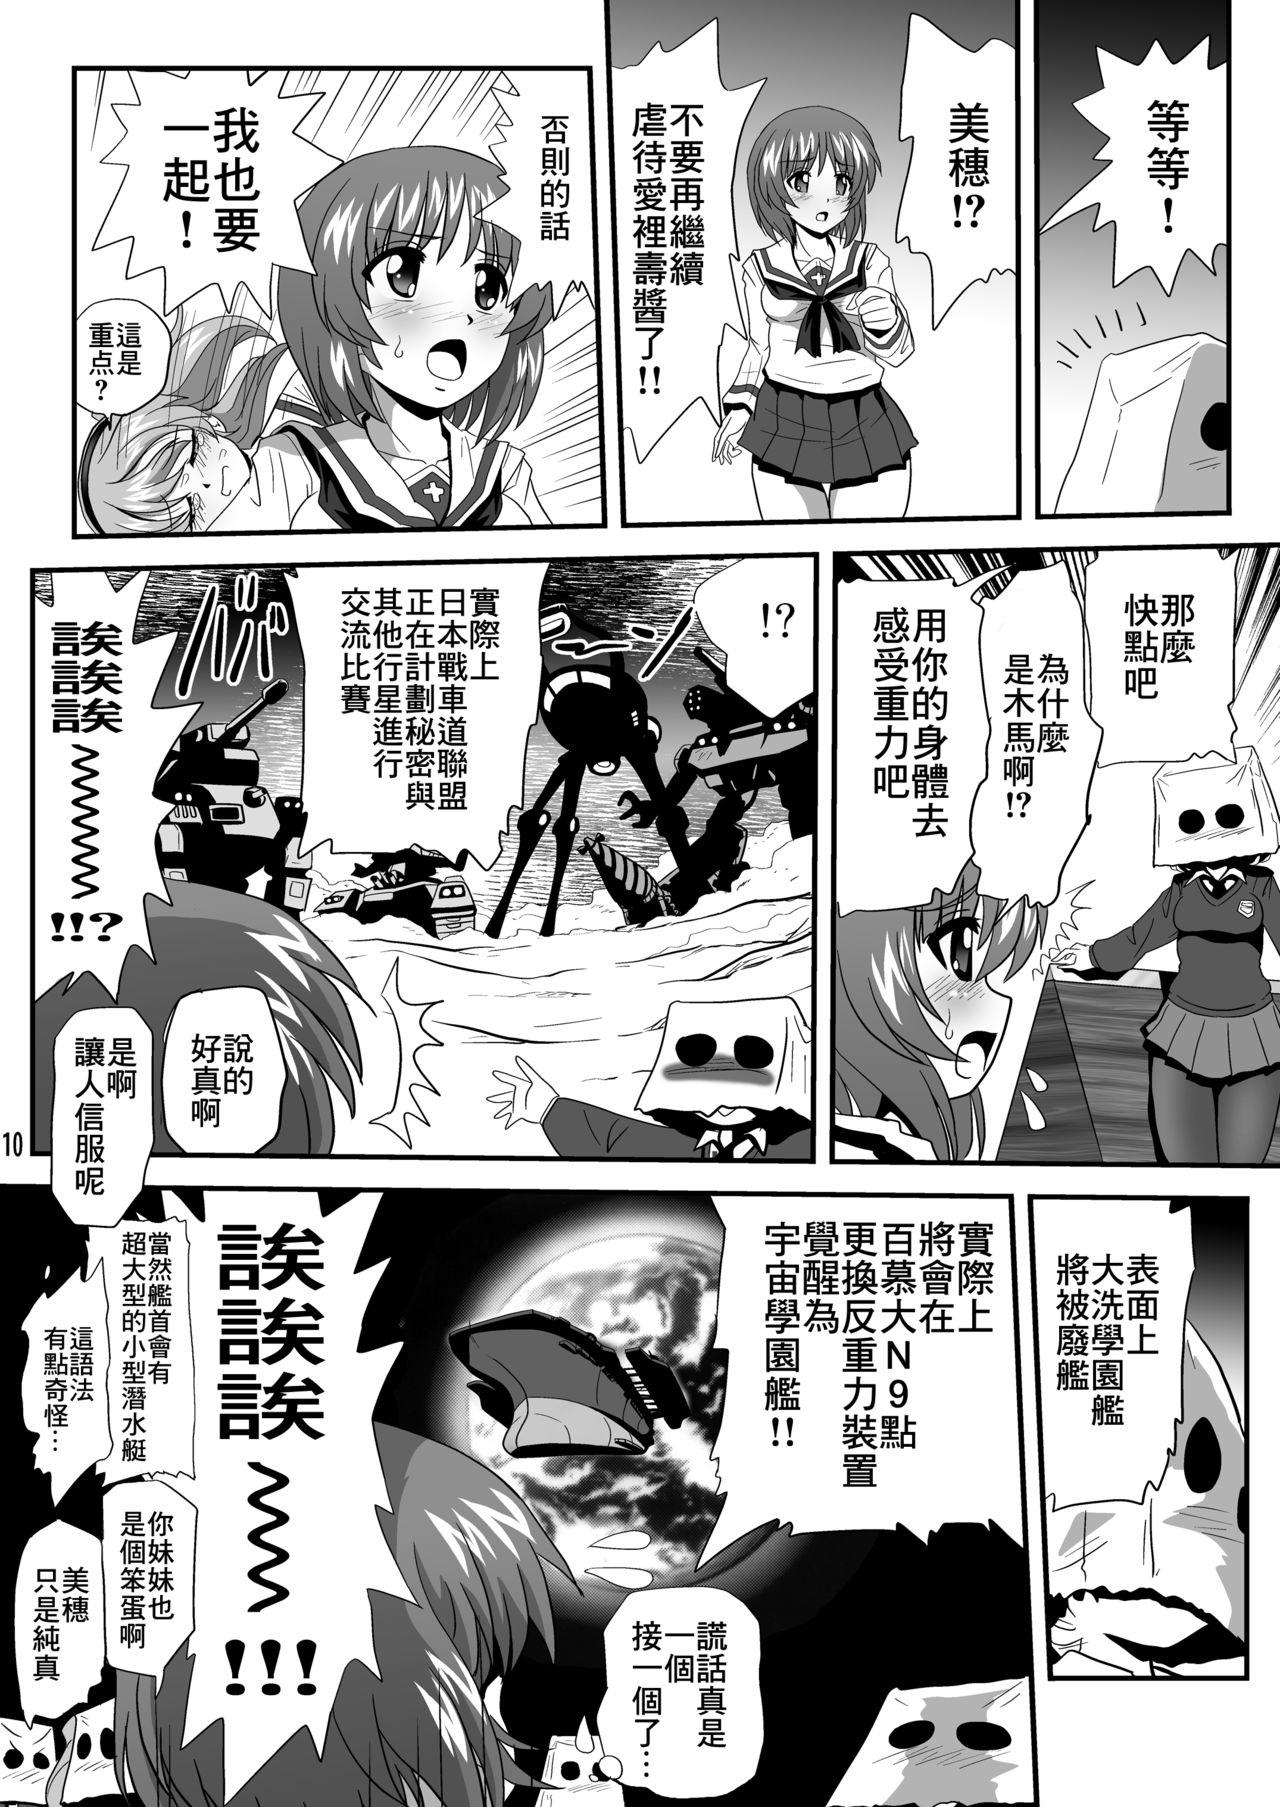 Sixtynine G Panzer 11 - Girls und panzer Small Tits - Page 10